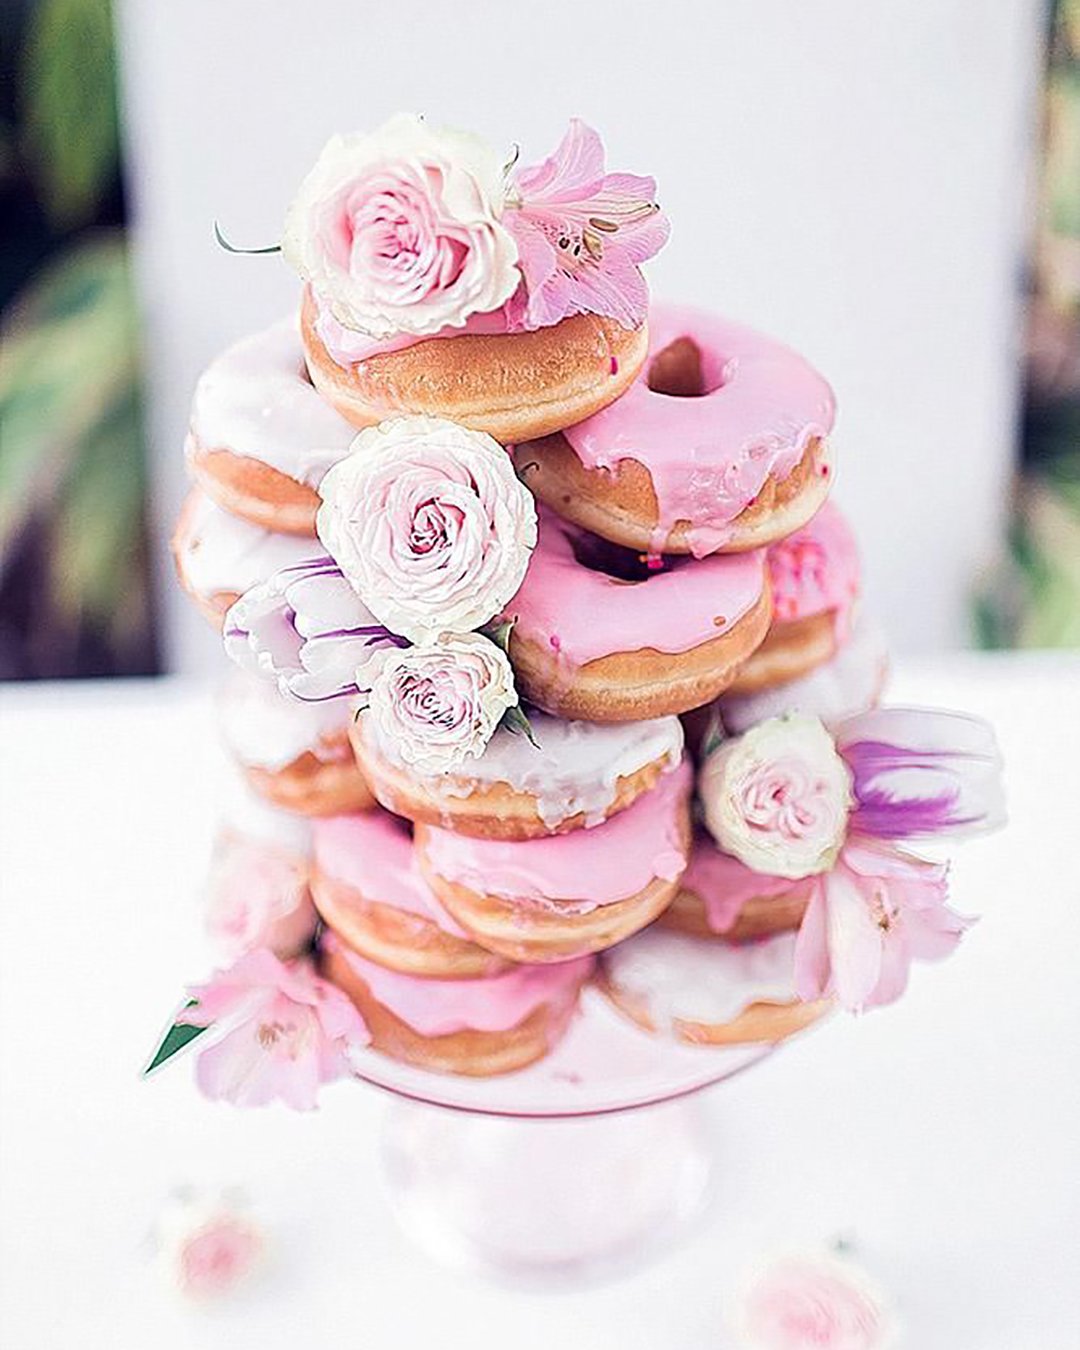 wedding cake alternatives doughnuts tower with pink icing and roses sarah bentley via instagram